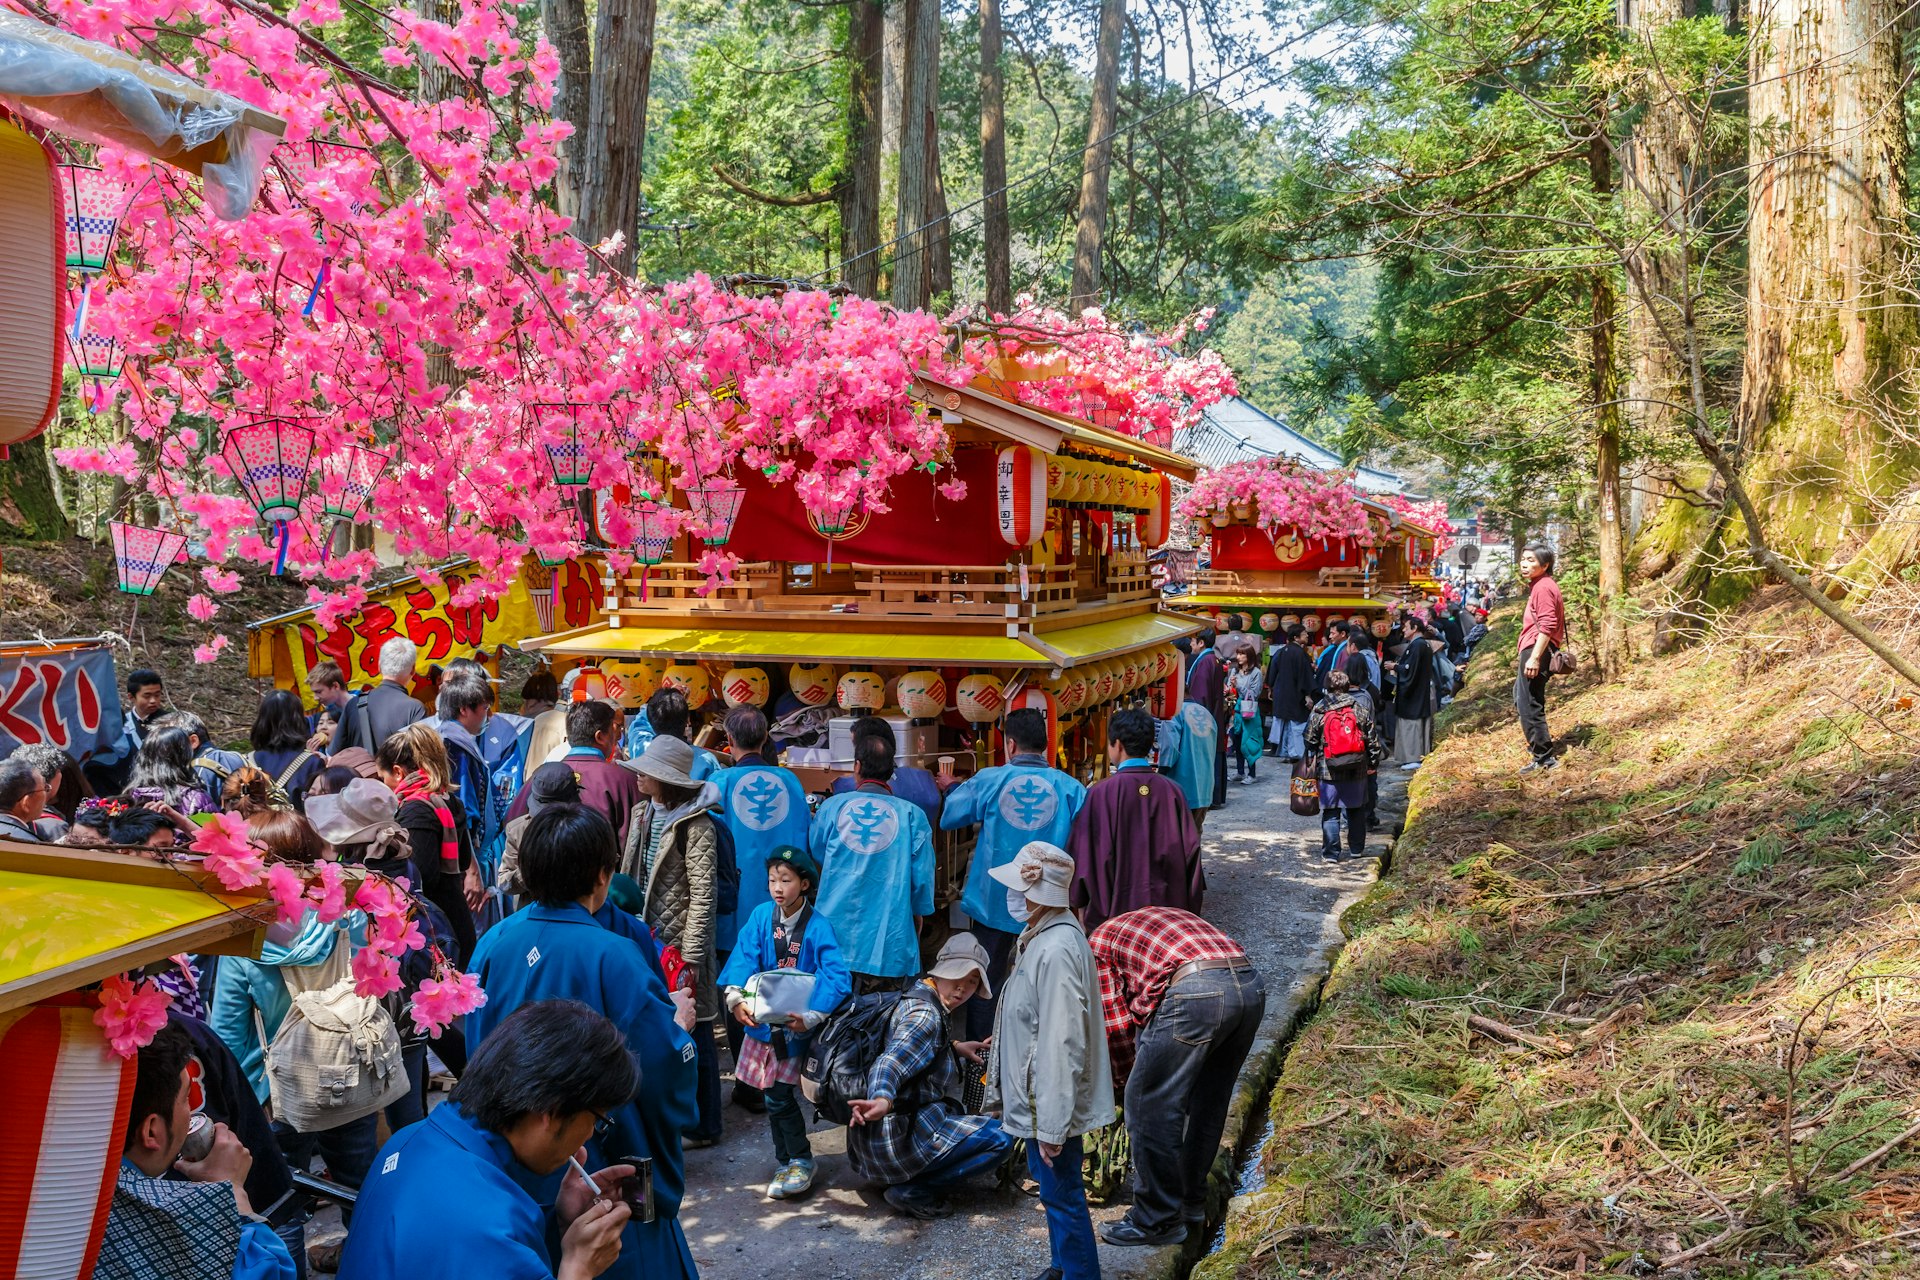 eople of Nikko celebrate Yayoi festival. It is a traditional event, which started in 767-770.